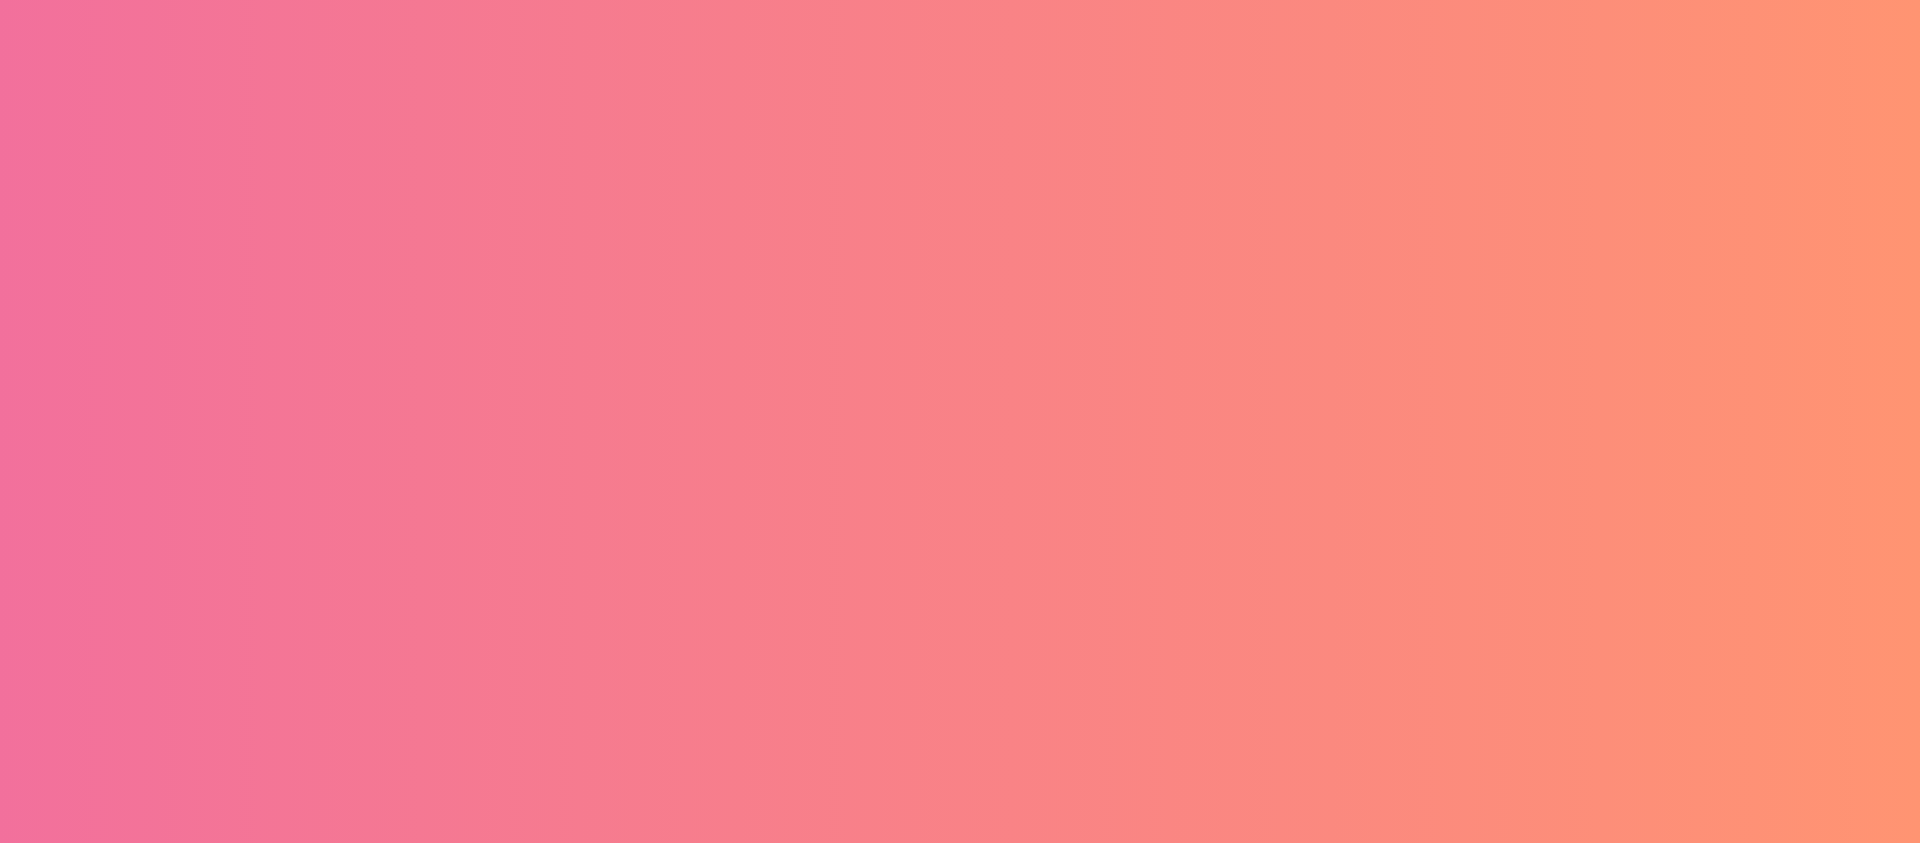 35 Stylish CSS Background Gradient Examples